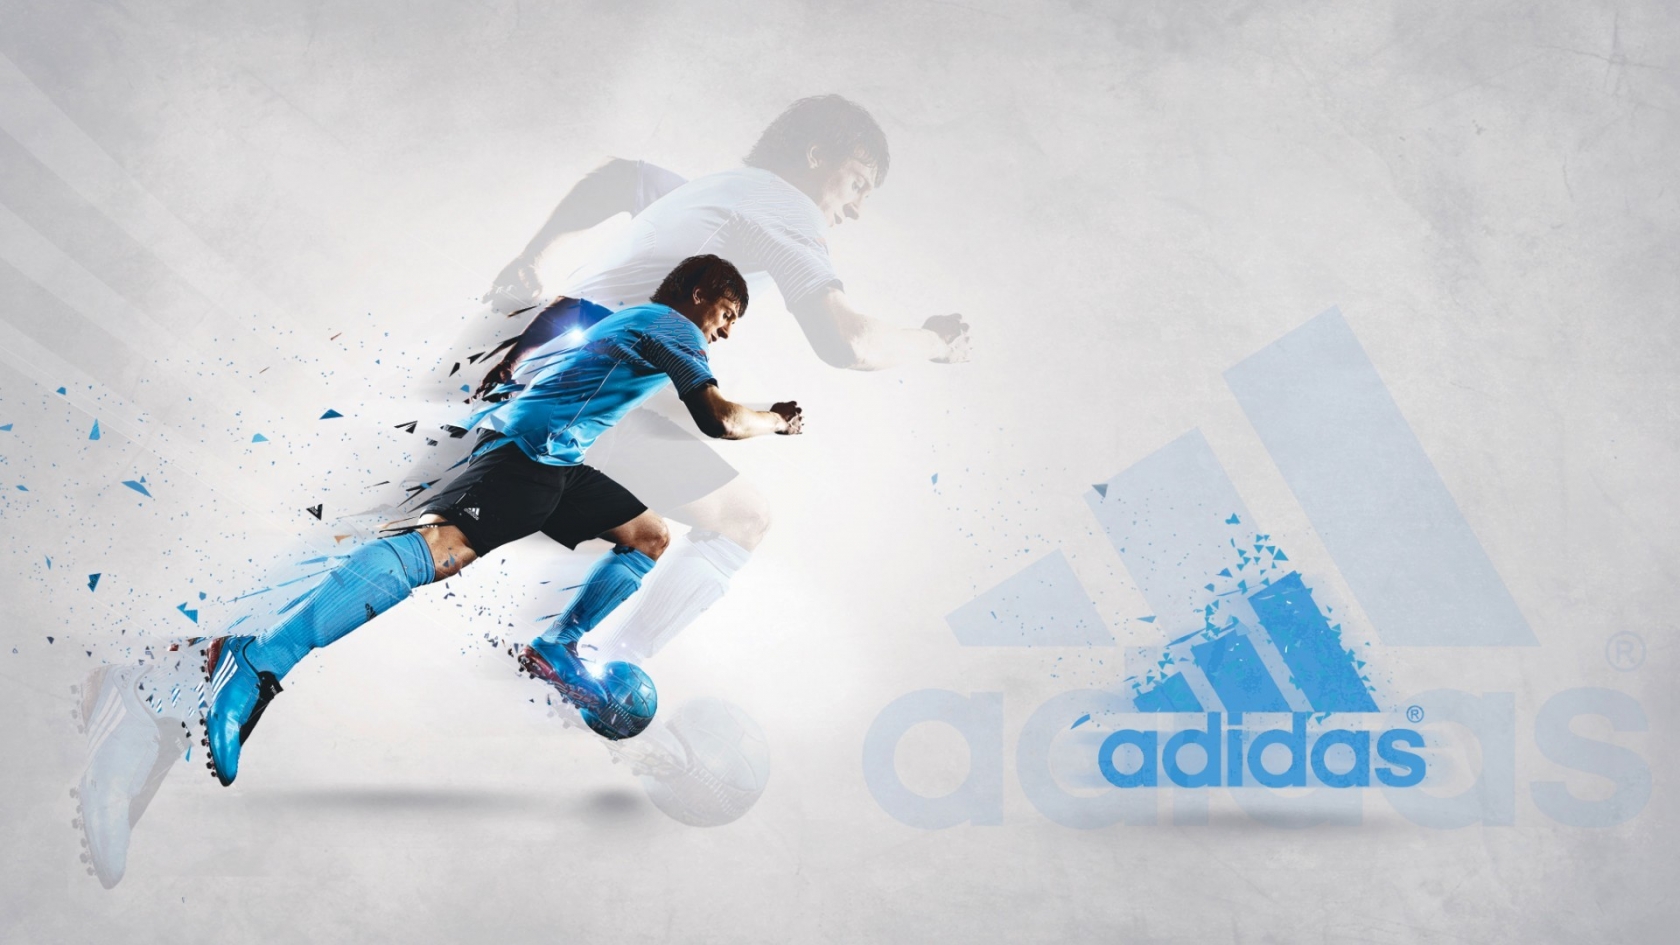 Adidas Poster for 1680 x 945 HDTV resolution